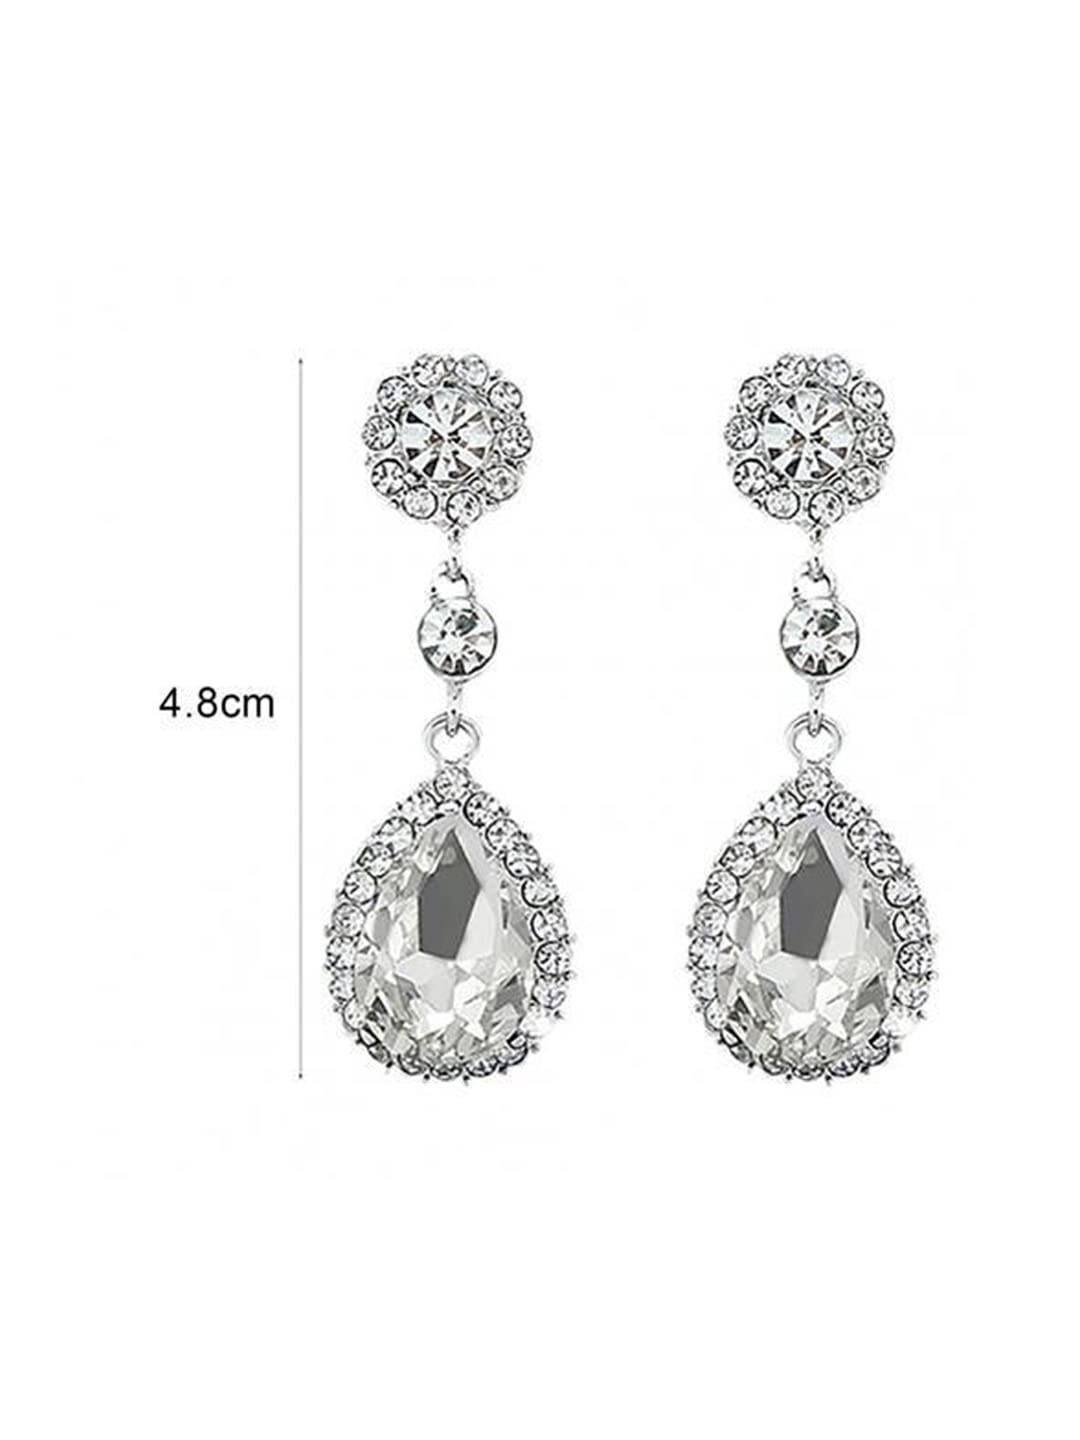 Yellow Chimes Drop Earrings for Women White Crystal Drop Earrings Silver Plated Fashionable Drop Earrings For Women and Girls.